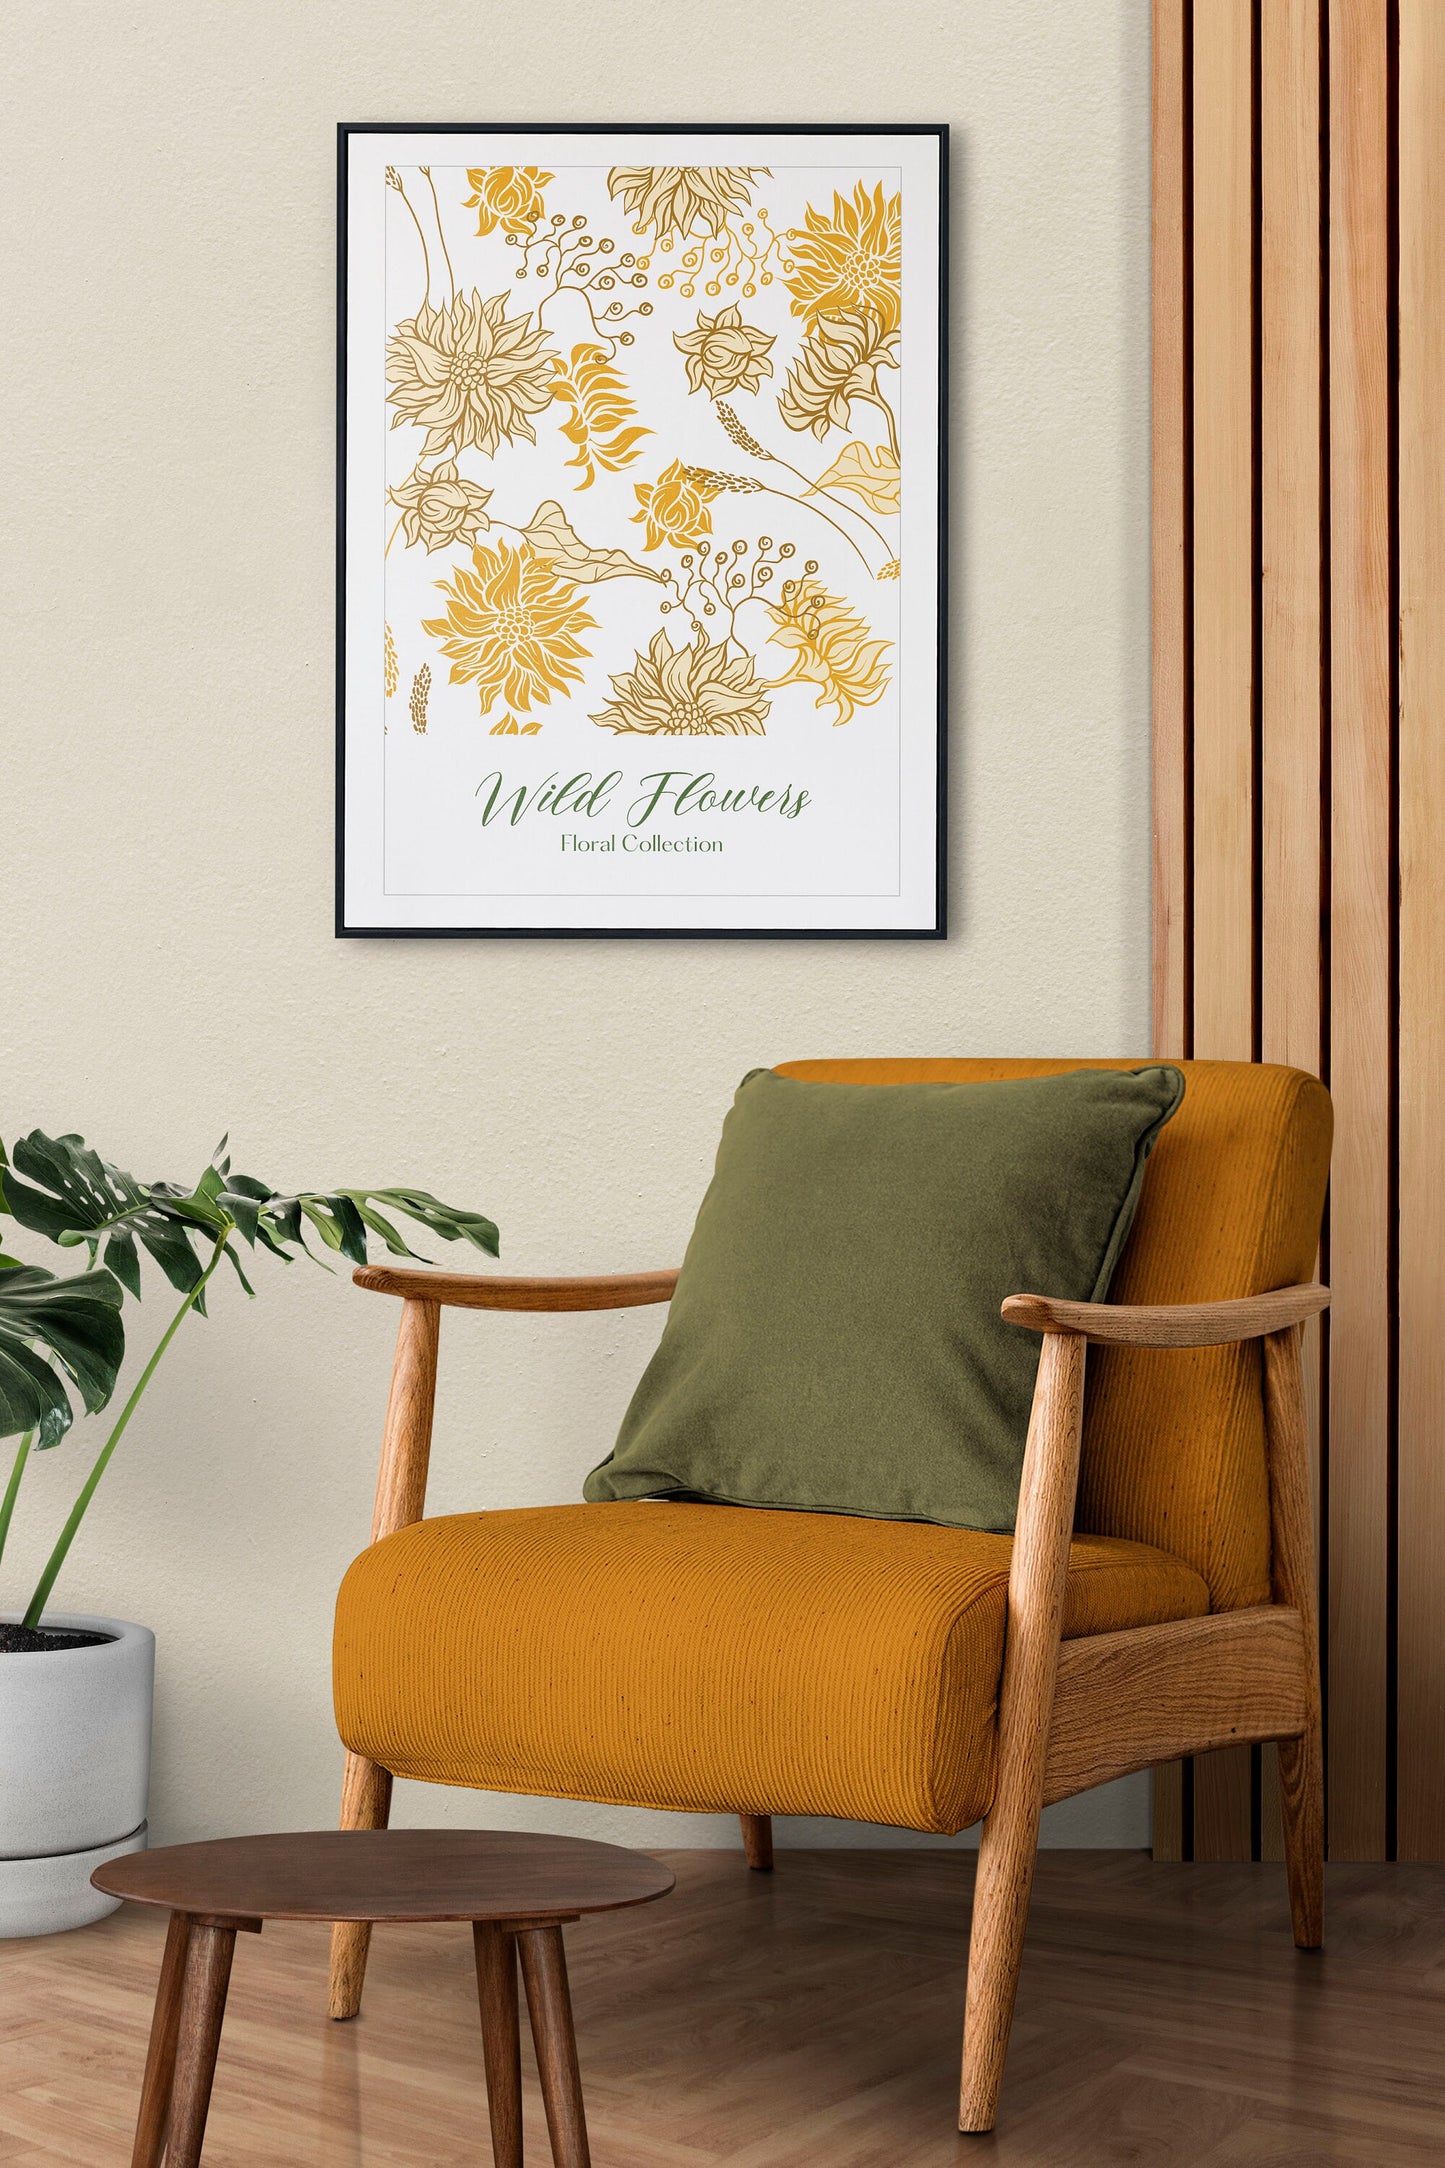 Floral Collection Flower Prints, Boho Home Decor, Wild Flowers Wall Art, Flower Prints, Living Room, A5/A4/A3/A2/A1, Different Colours,